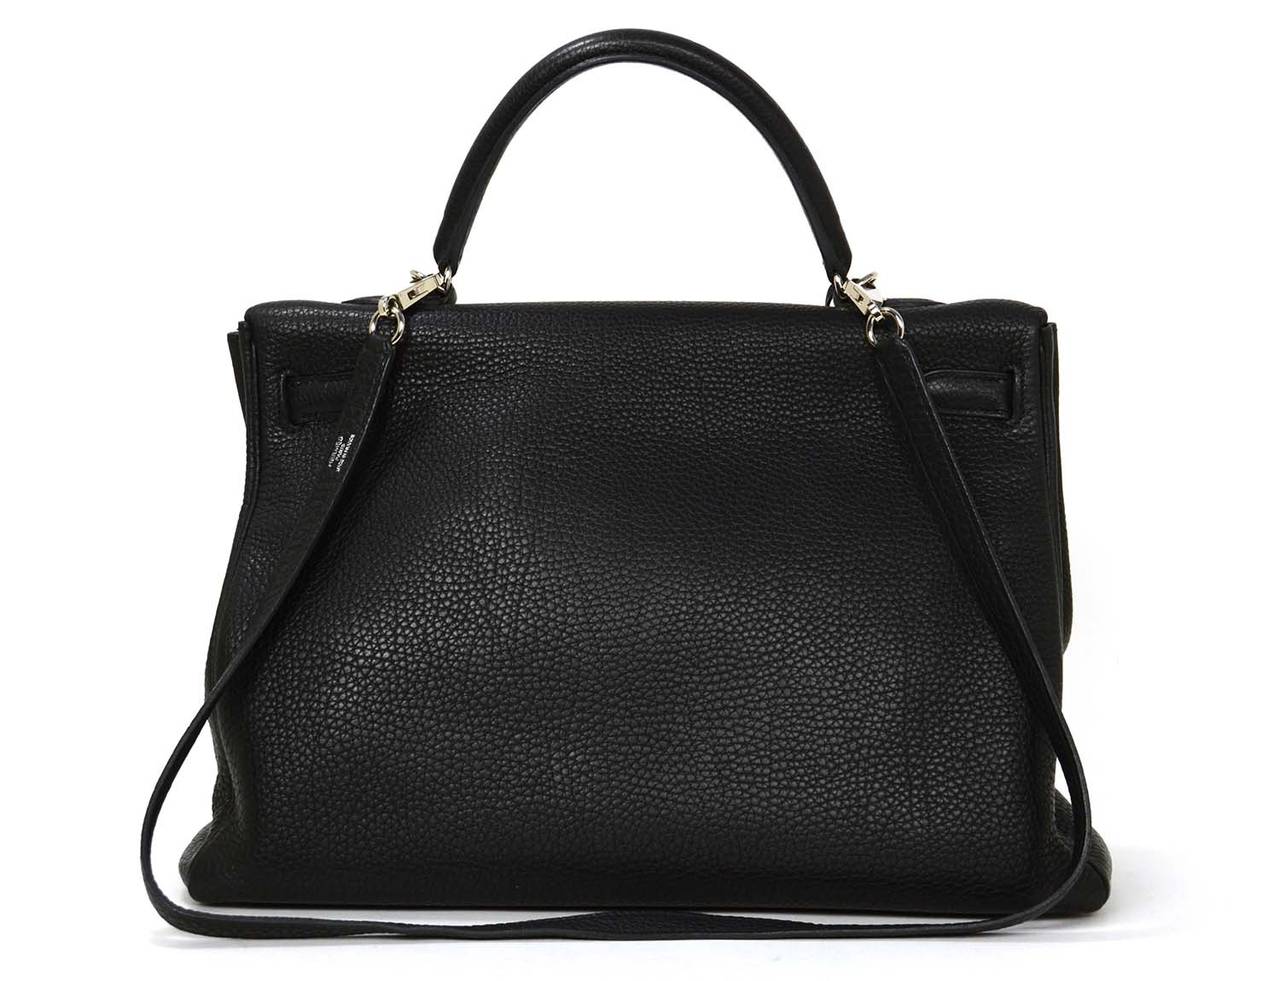 HERMES 2009 Black Togo Leather 35cm Kelly Bag PHW In Excellent Condition In New York, NY